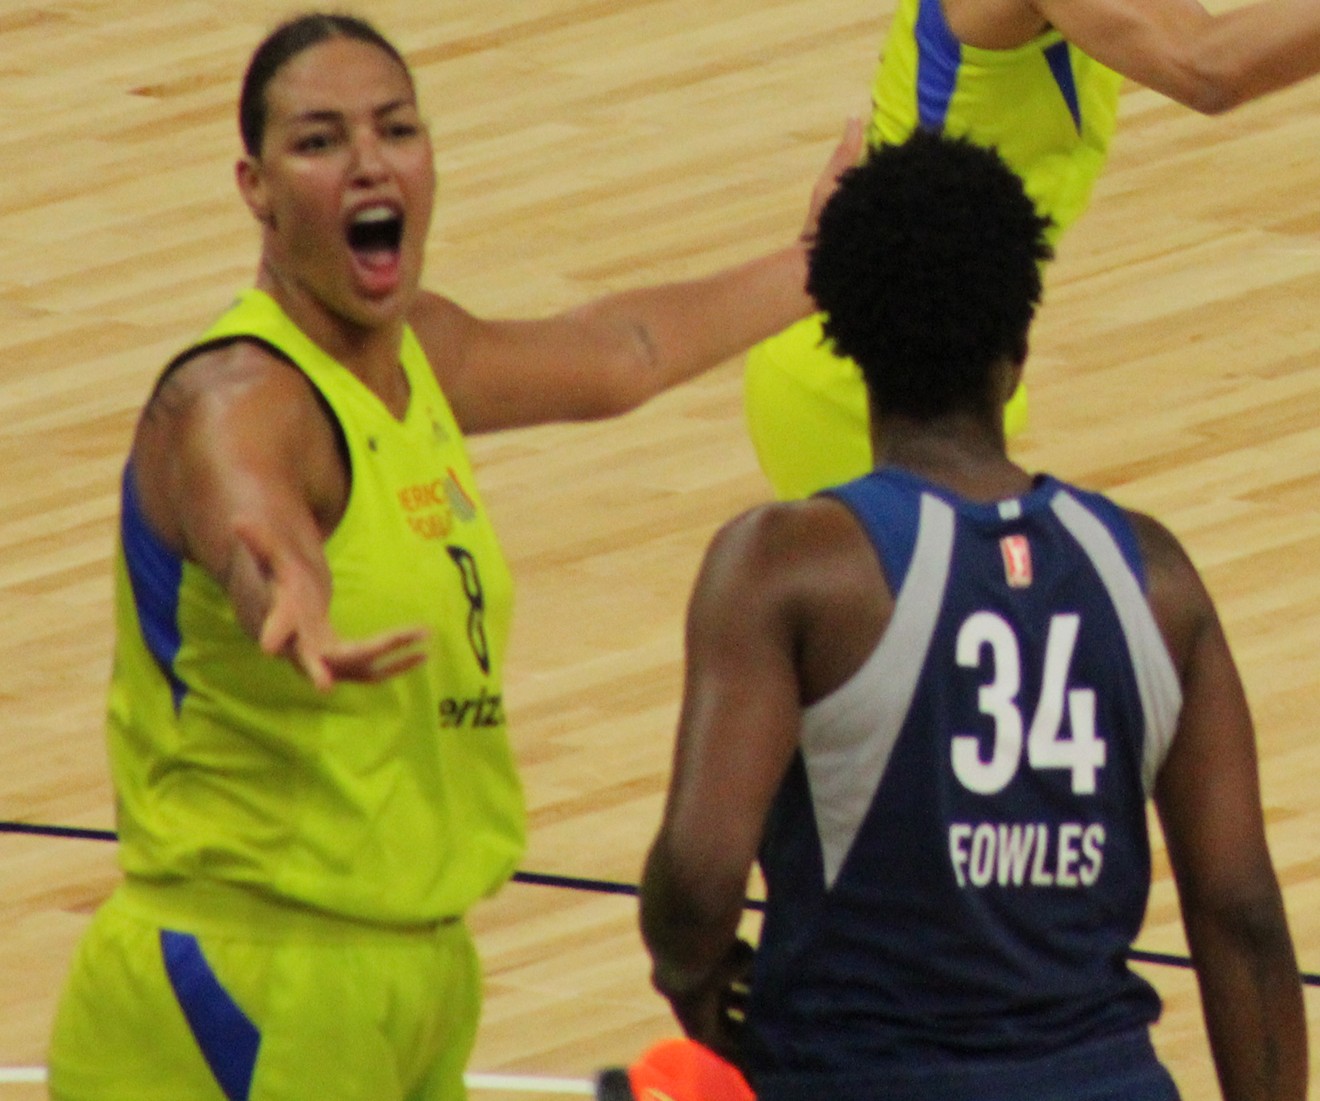 Dallas Wings center Liz Cambage (left) has broken a WNBA record by scoring 53 points in one game.